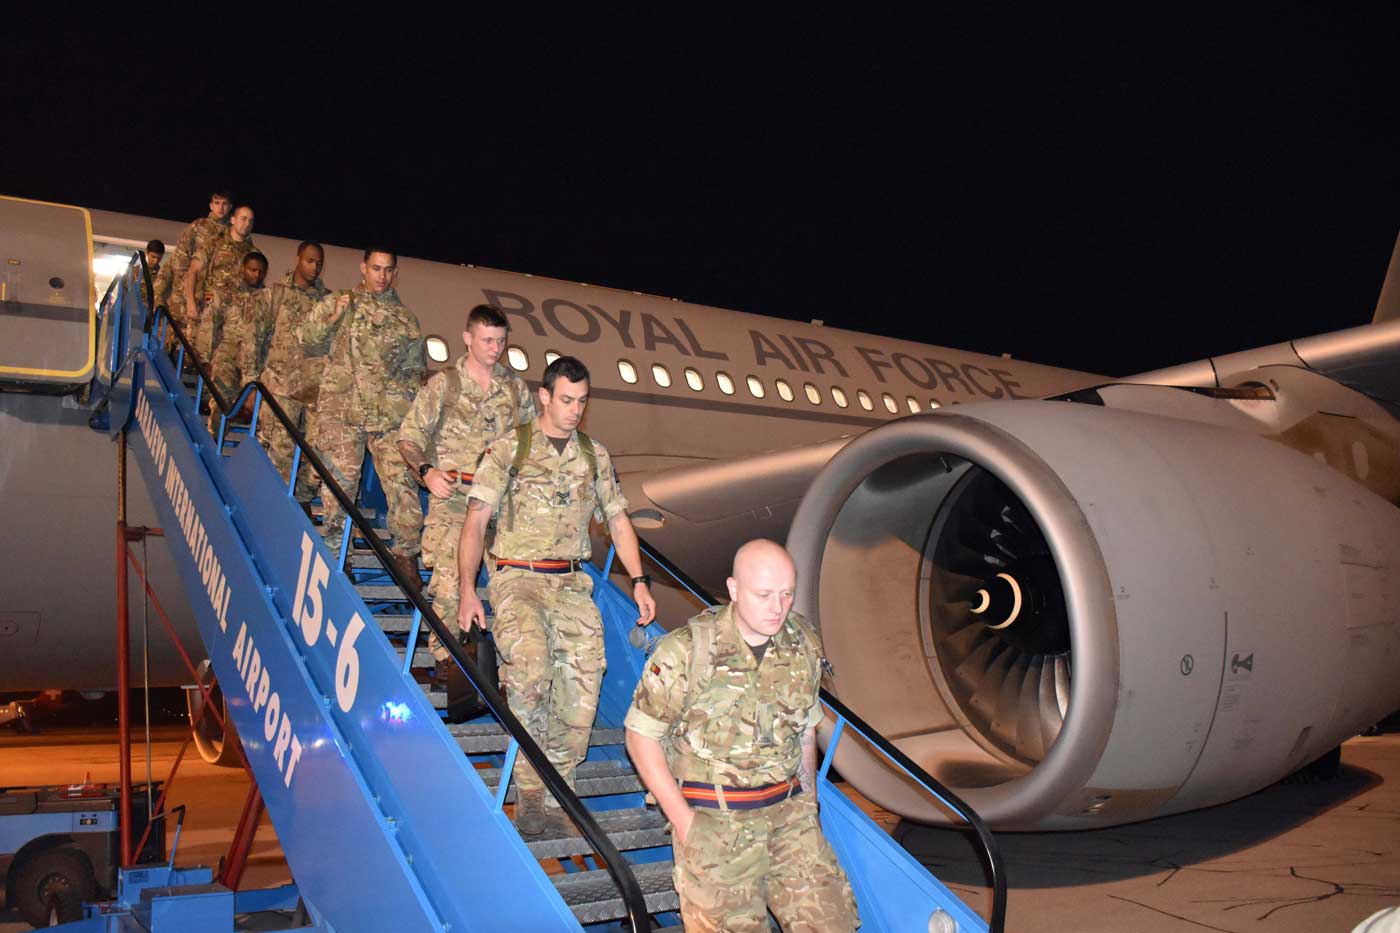 UK troops arrive at Sarajevo Airport in a Royal Air Force Voyager A330-200 aircraft